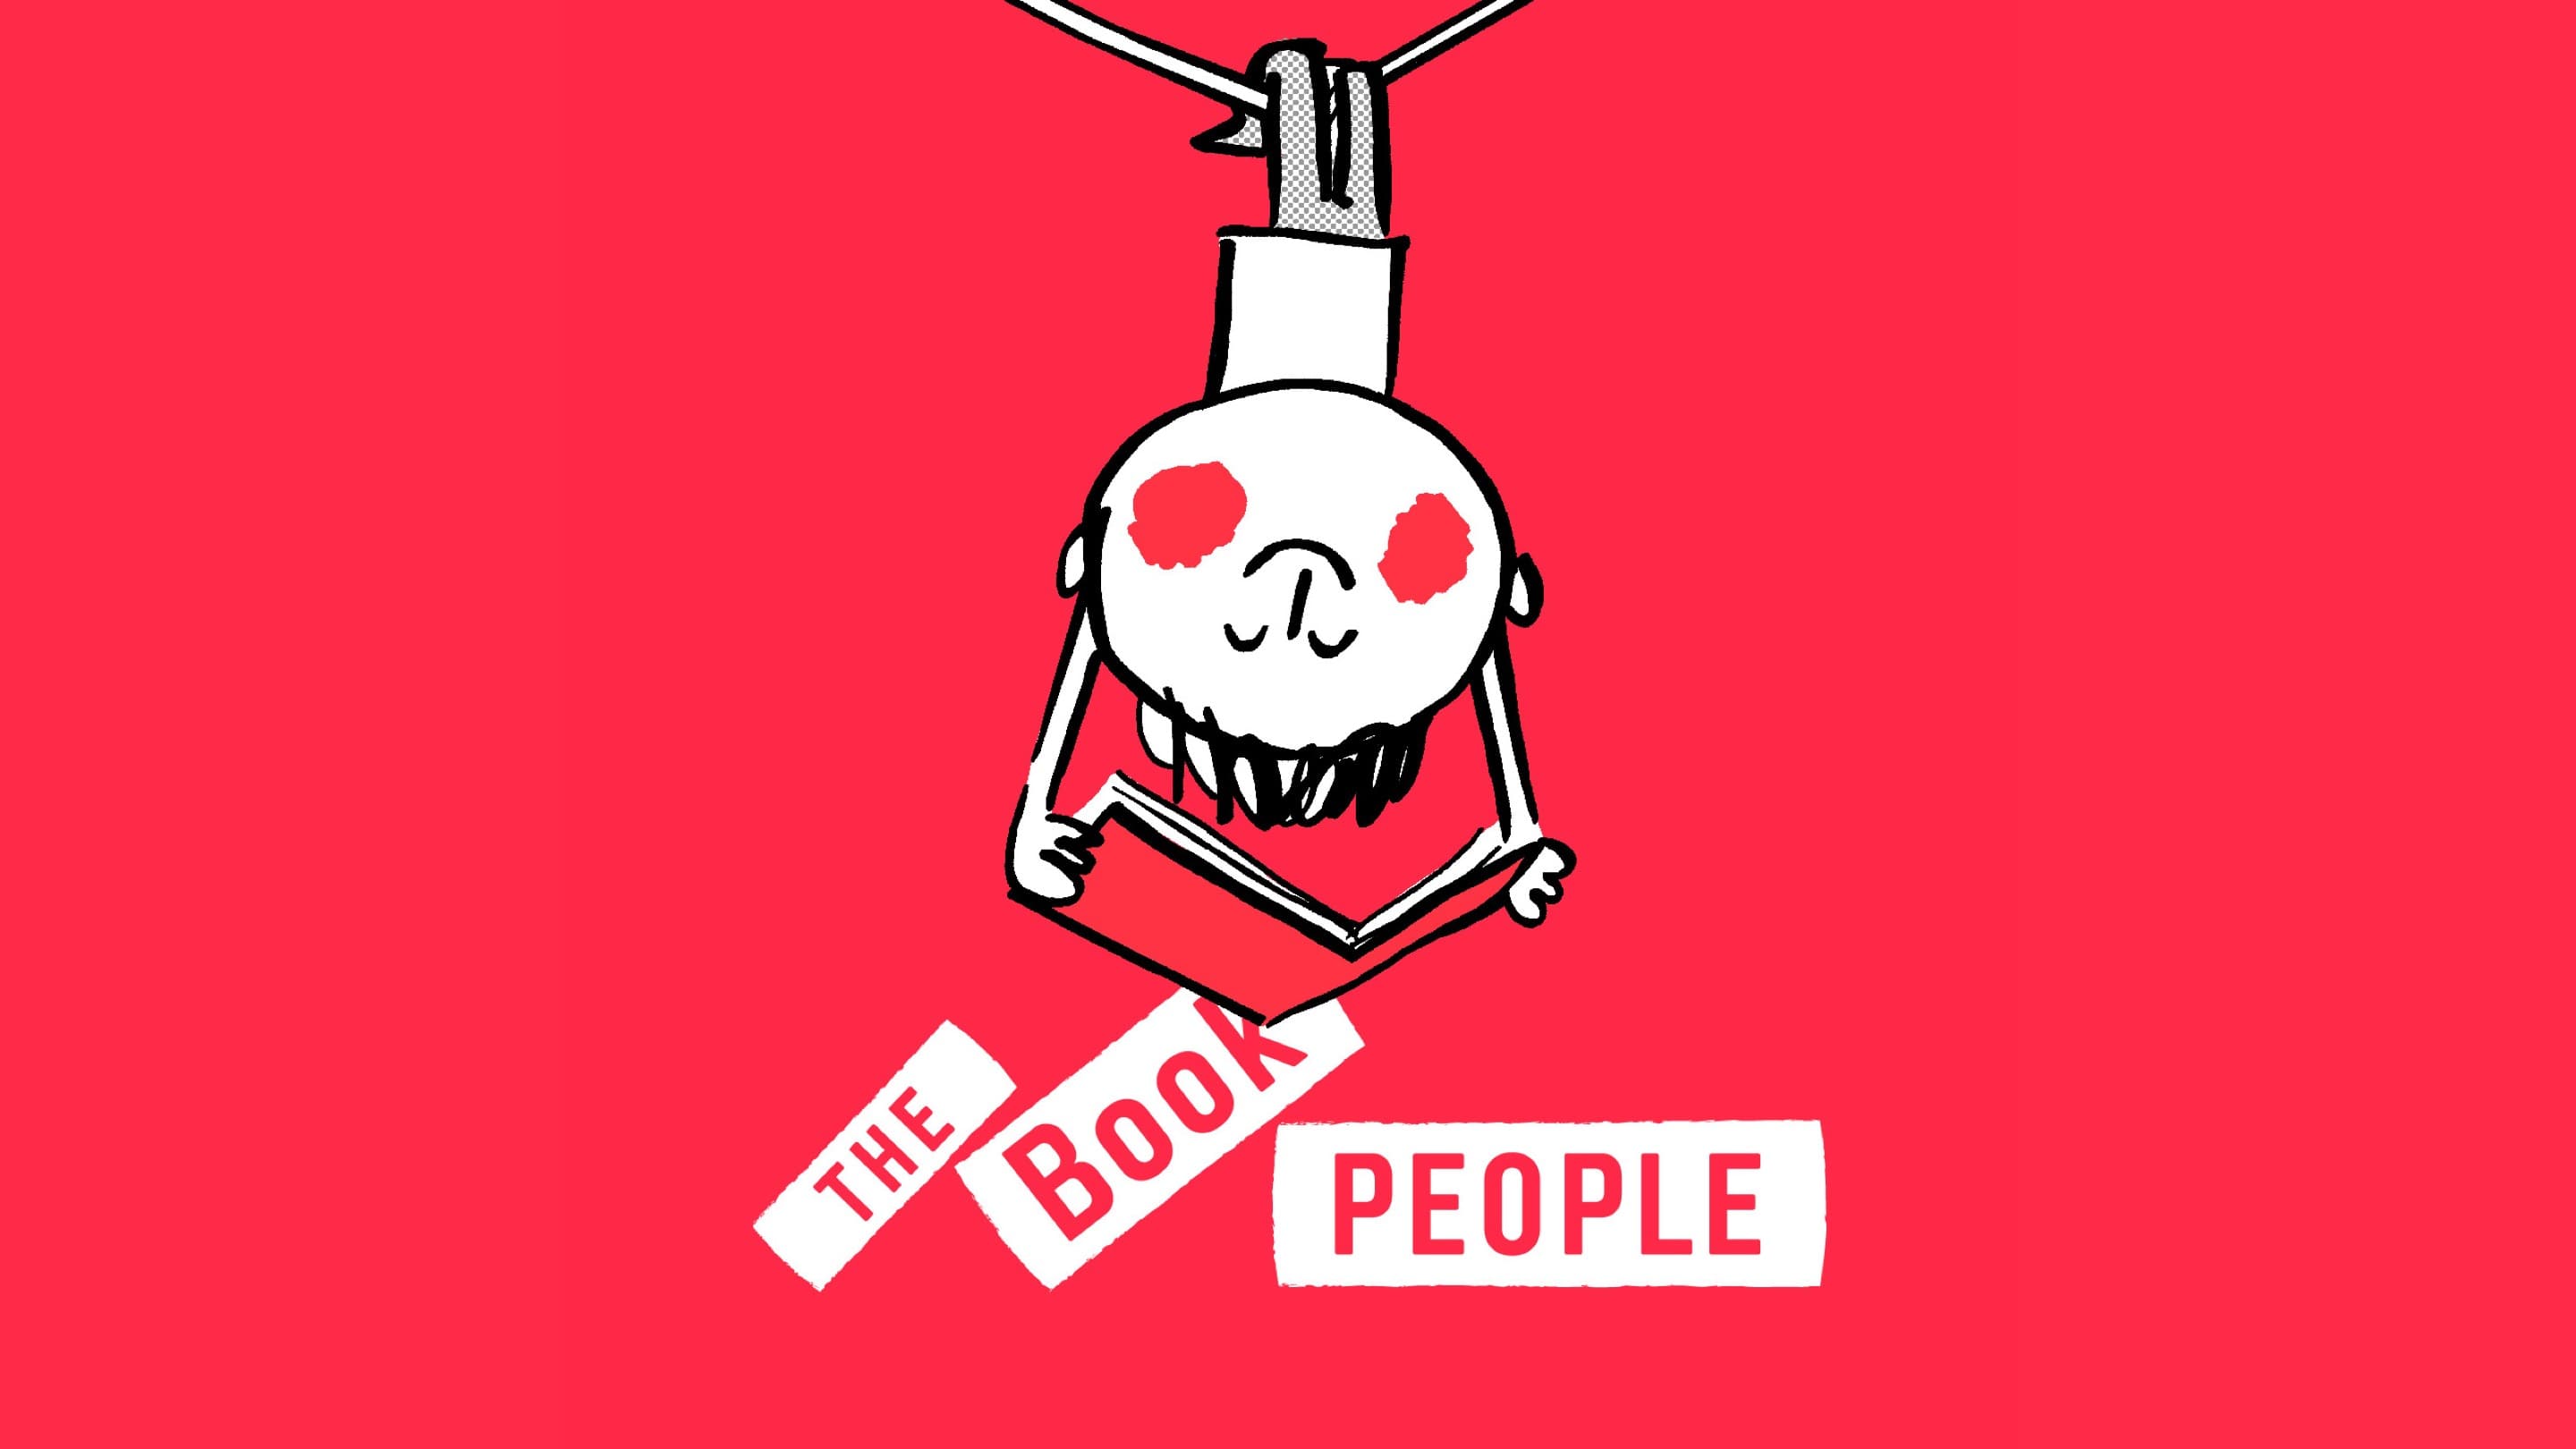 The Book People re-brand